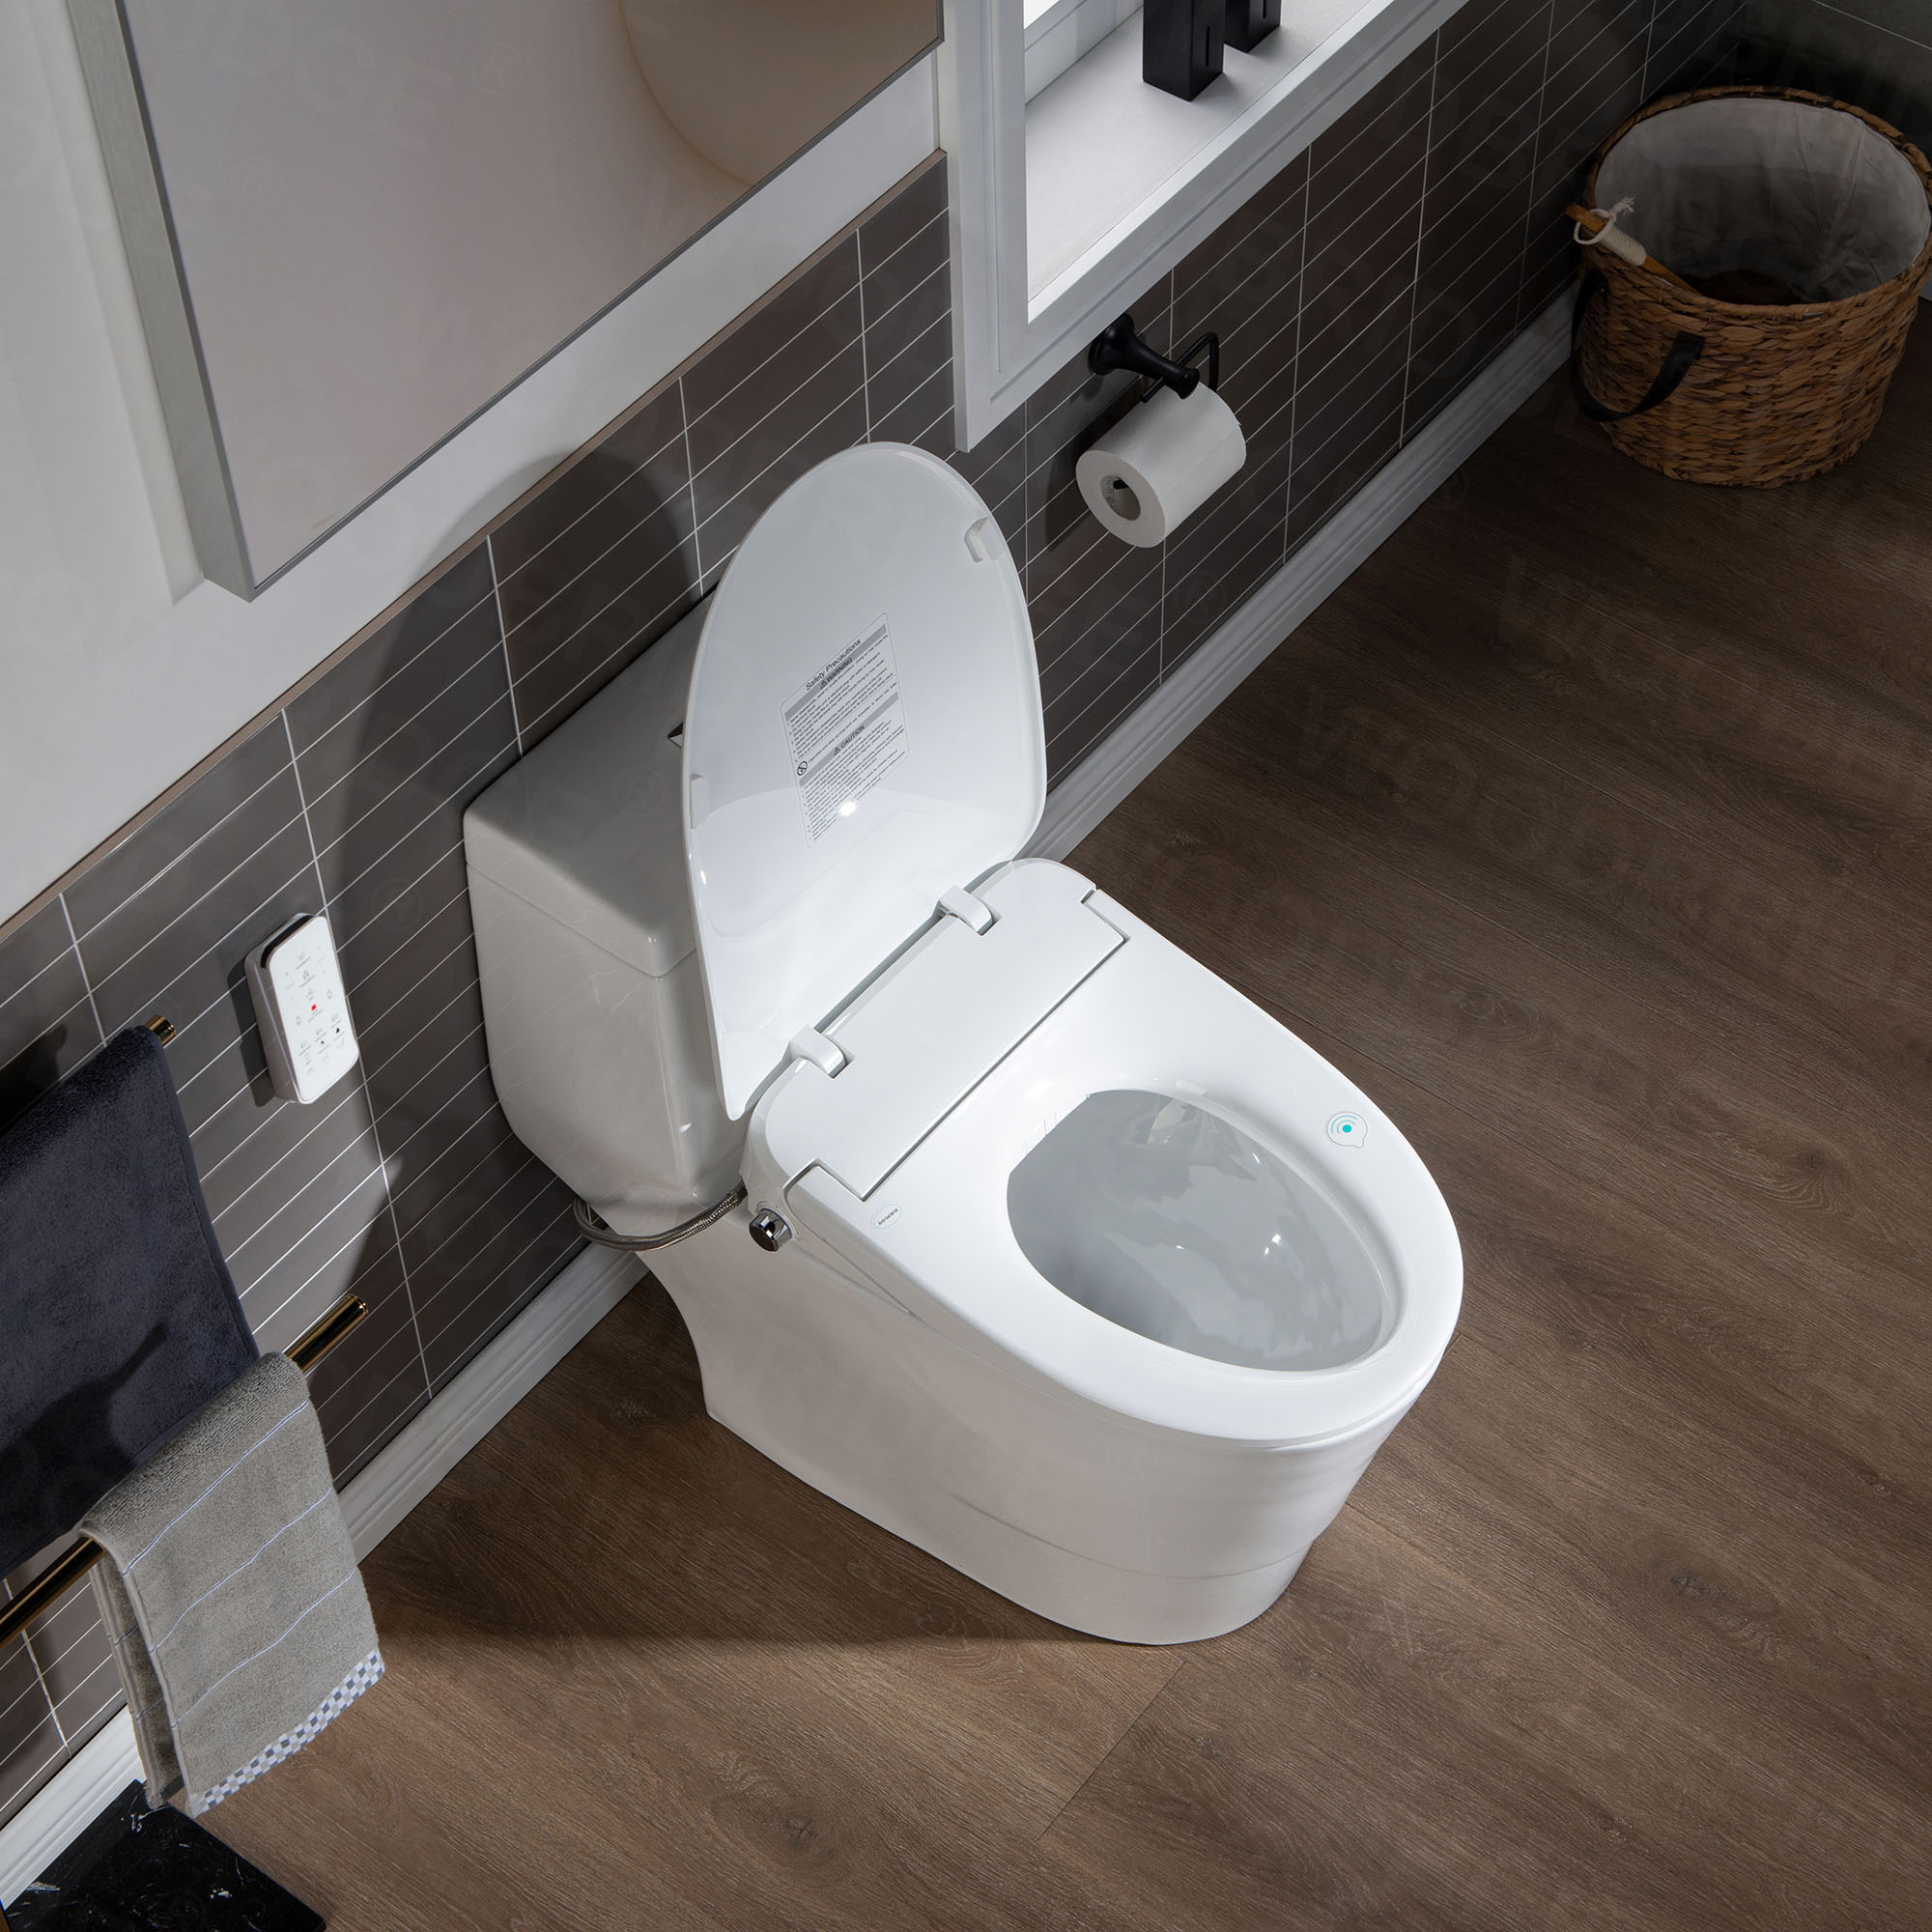  WOODBRIDGE T-0041 Elongated one Piece toilet with Smart Bidet Seat, Electronic Advanced Self Cleaning, Soft Close Lid, Adjustable Water Temperature, LED Nightlight, Heated Seat, Warm air Dryer. WHITE_6588